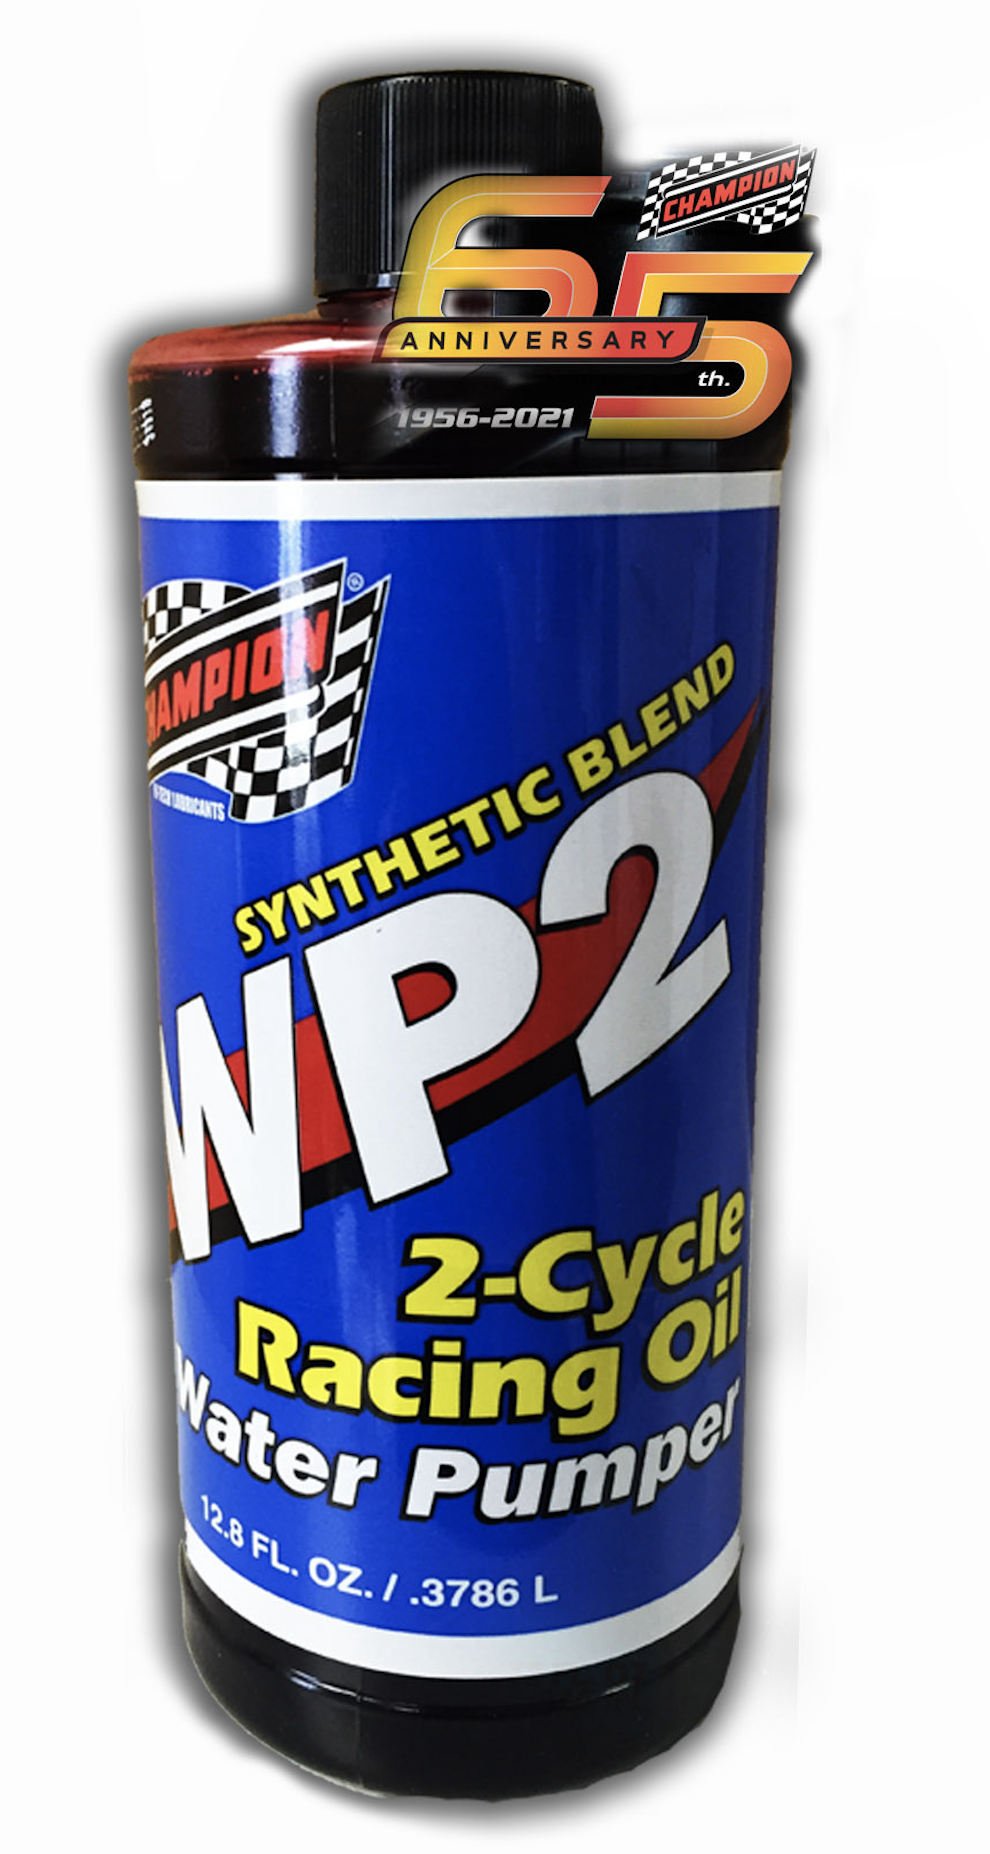 Champion WP2 is the Ultimate 2-Cycle Racing Motor Oil'